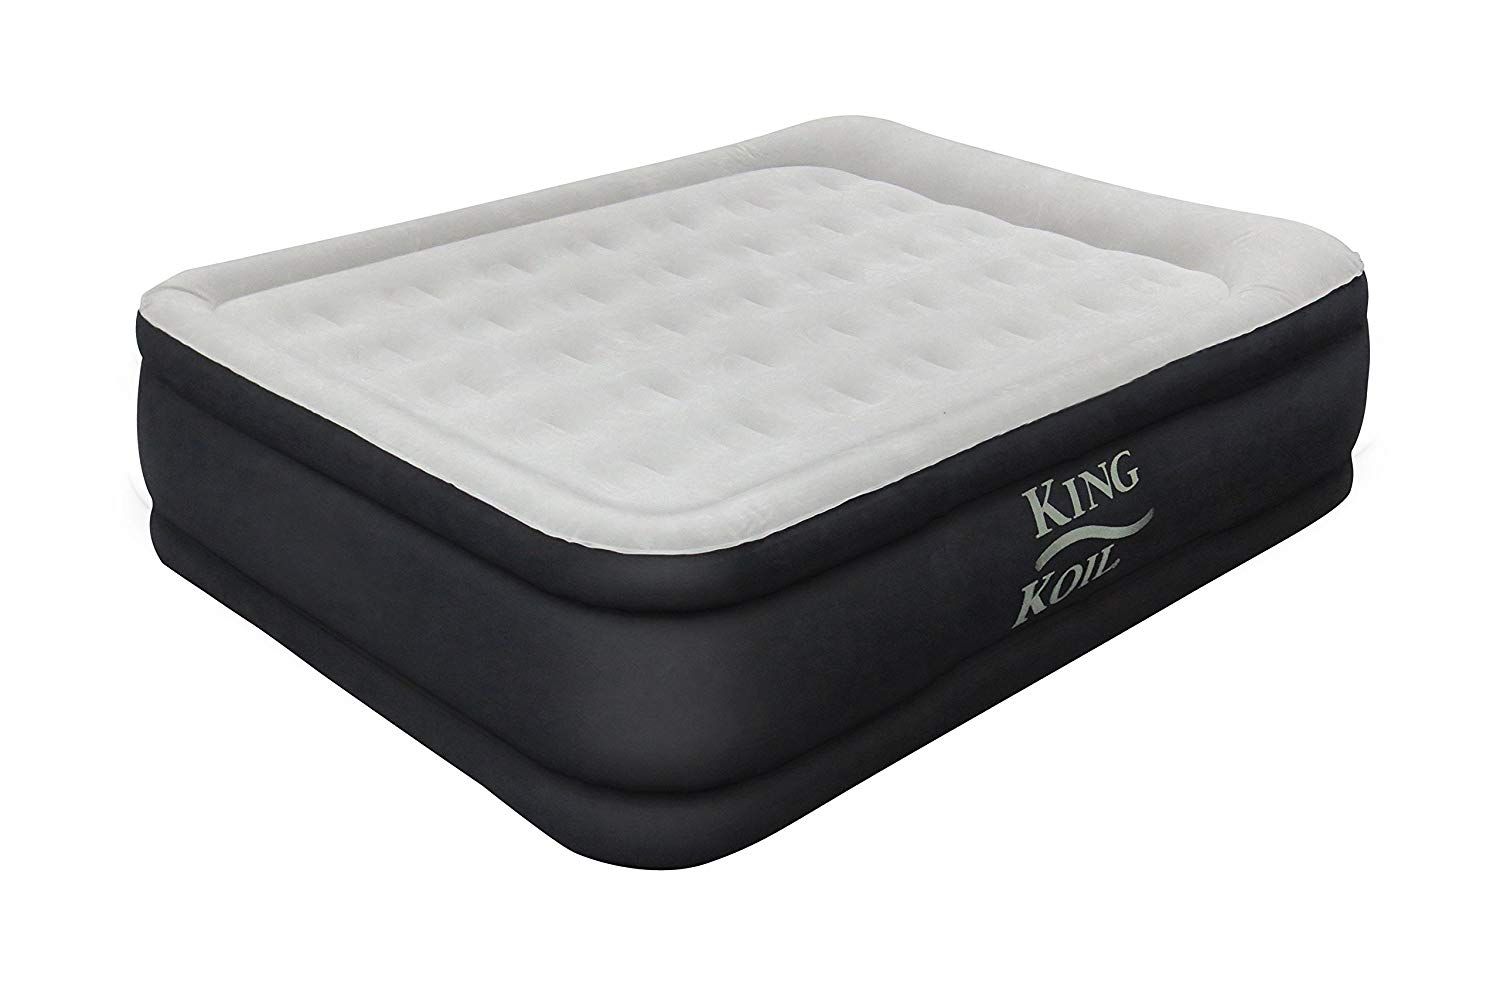 king koil air mattress in stores